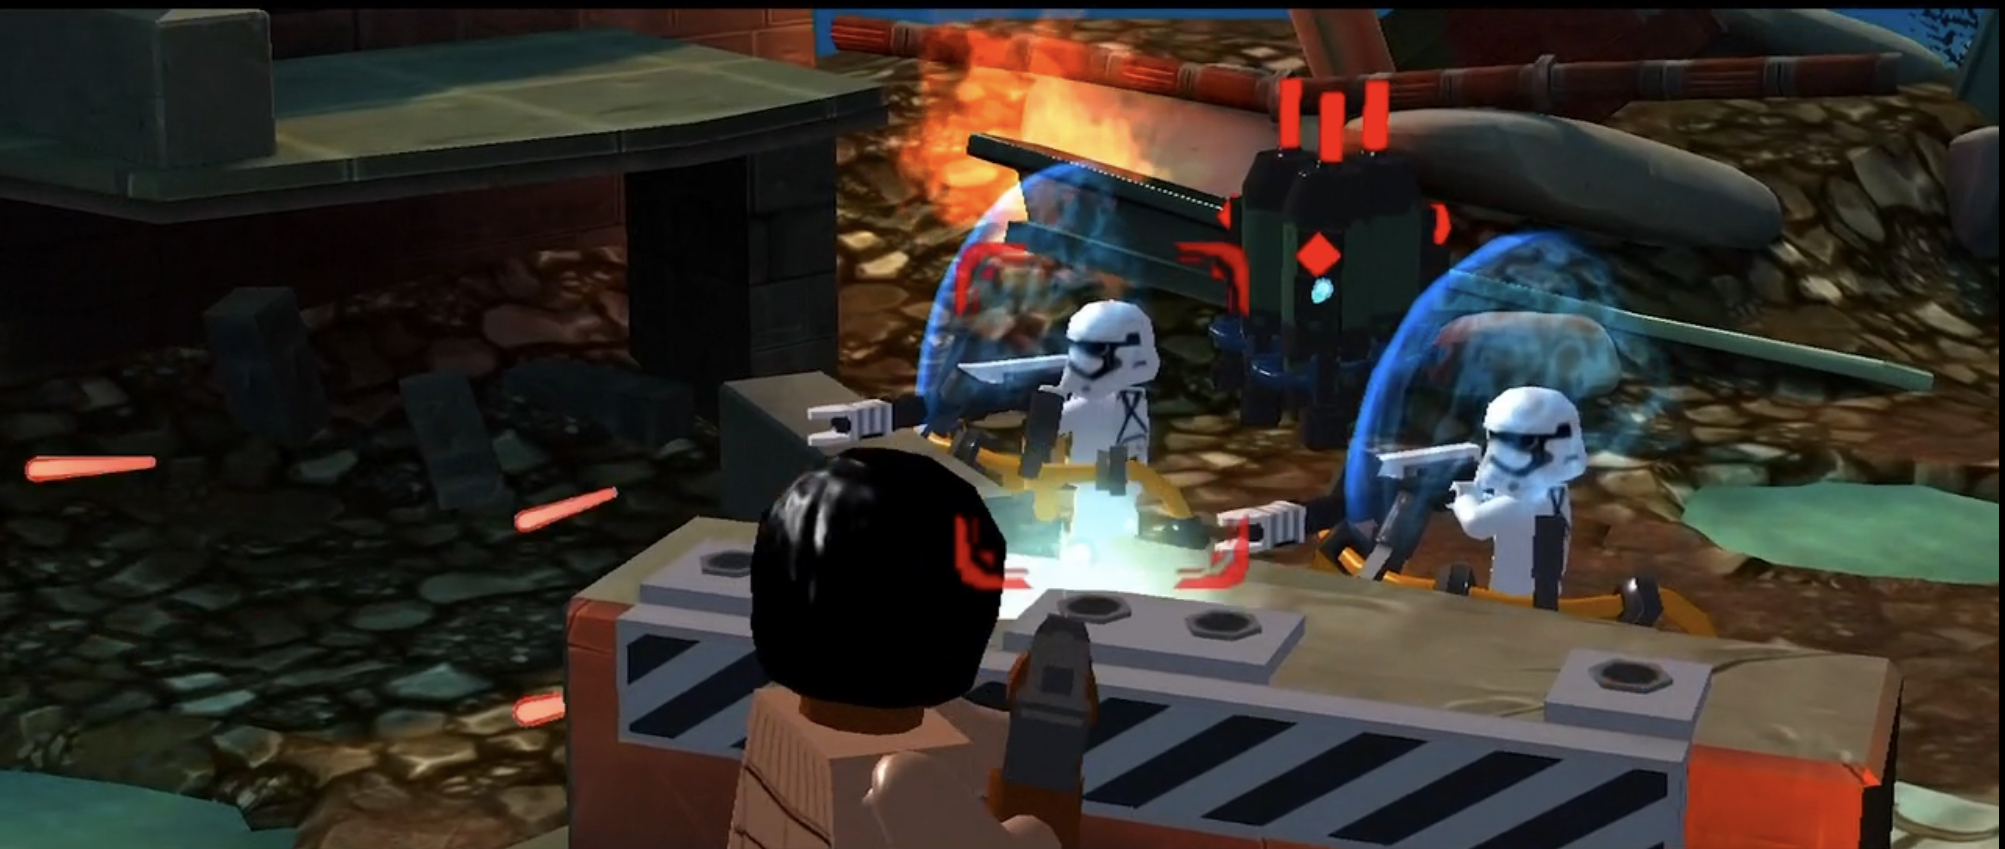 Best Star Wars Games For Iphone And Ipad In 2020 Imore - roblox base vs base conquest tiny army battles roblox adventure